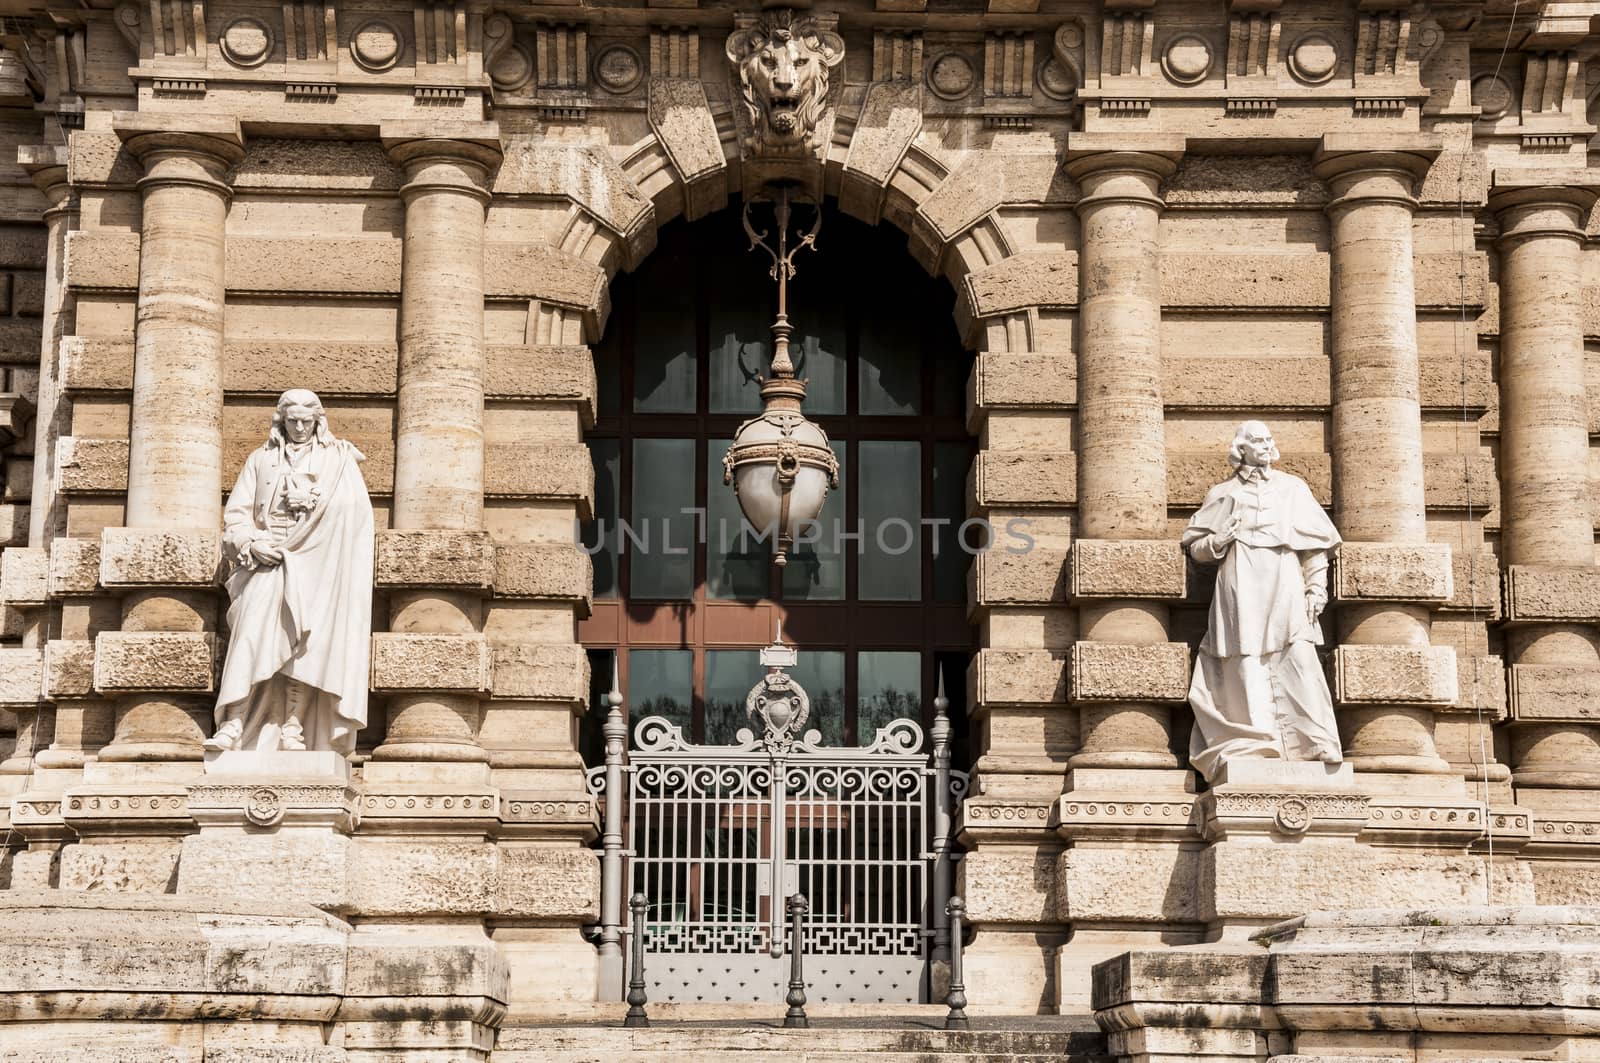 Palace of Justice in Rome, Italy by edella